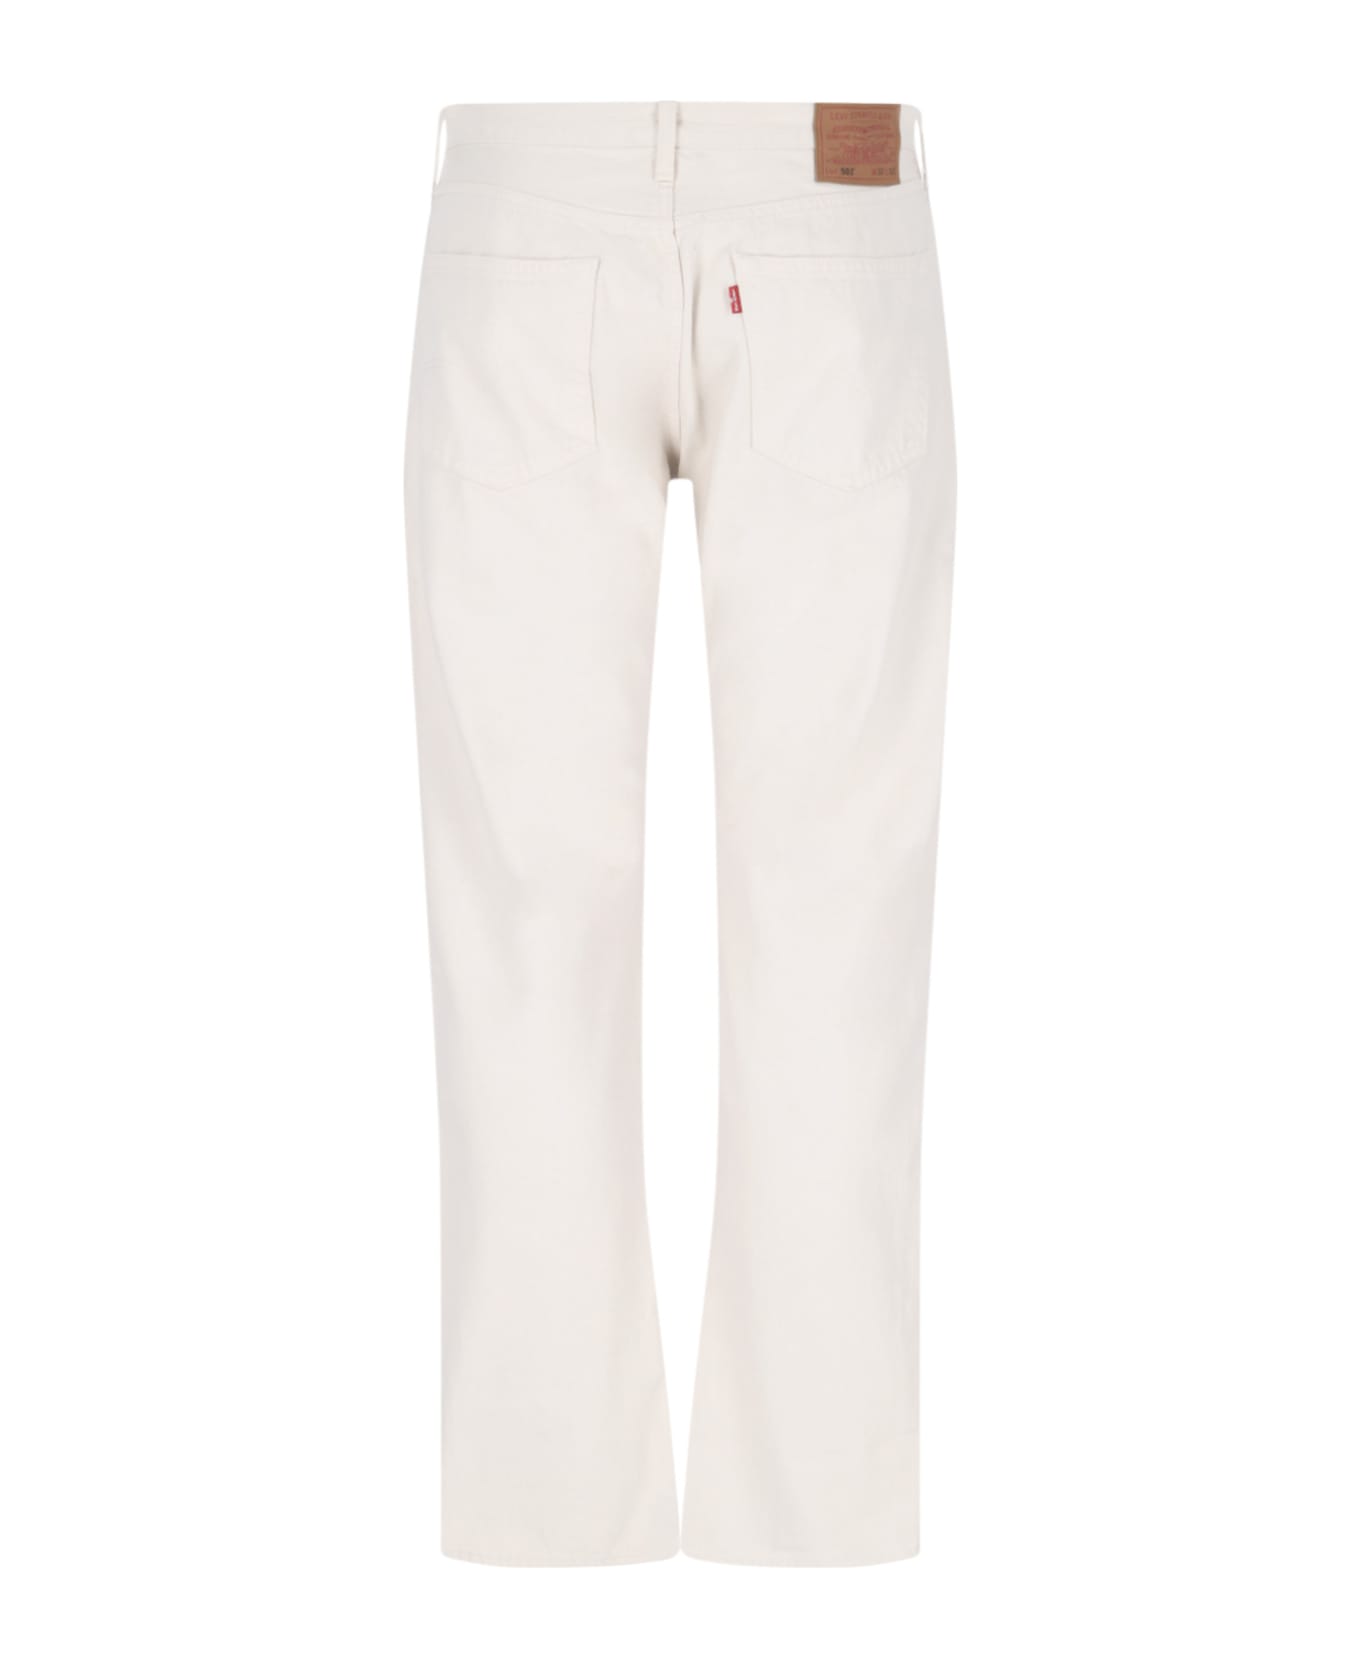 Levi's '501 My Candy' Jeans - Crema